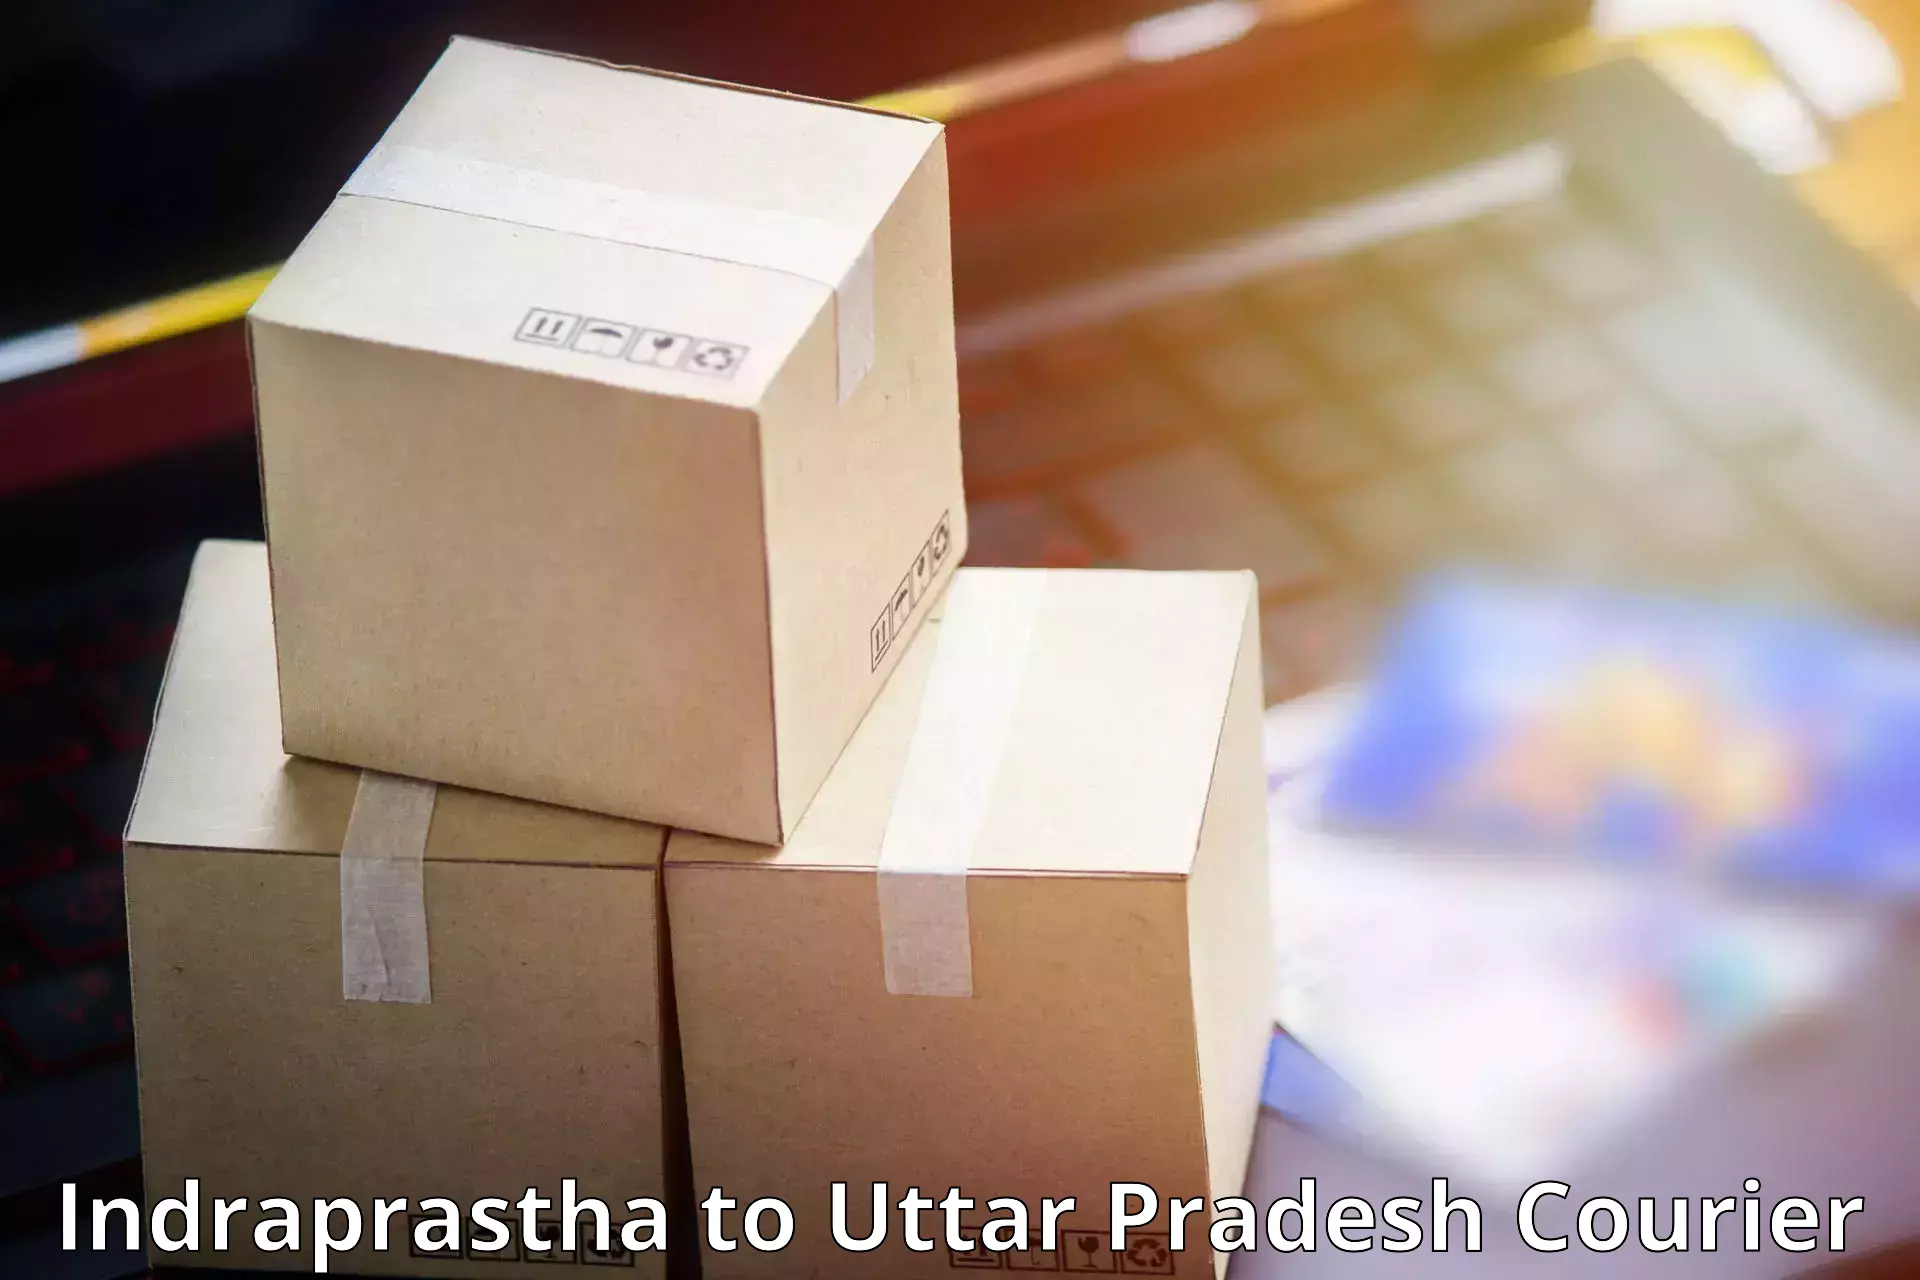 Bulk courier orders in Indraprastha to Chirgaon